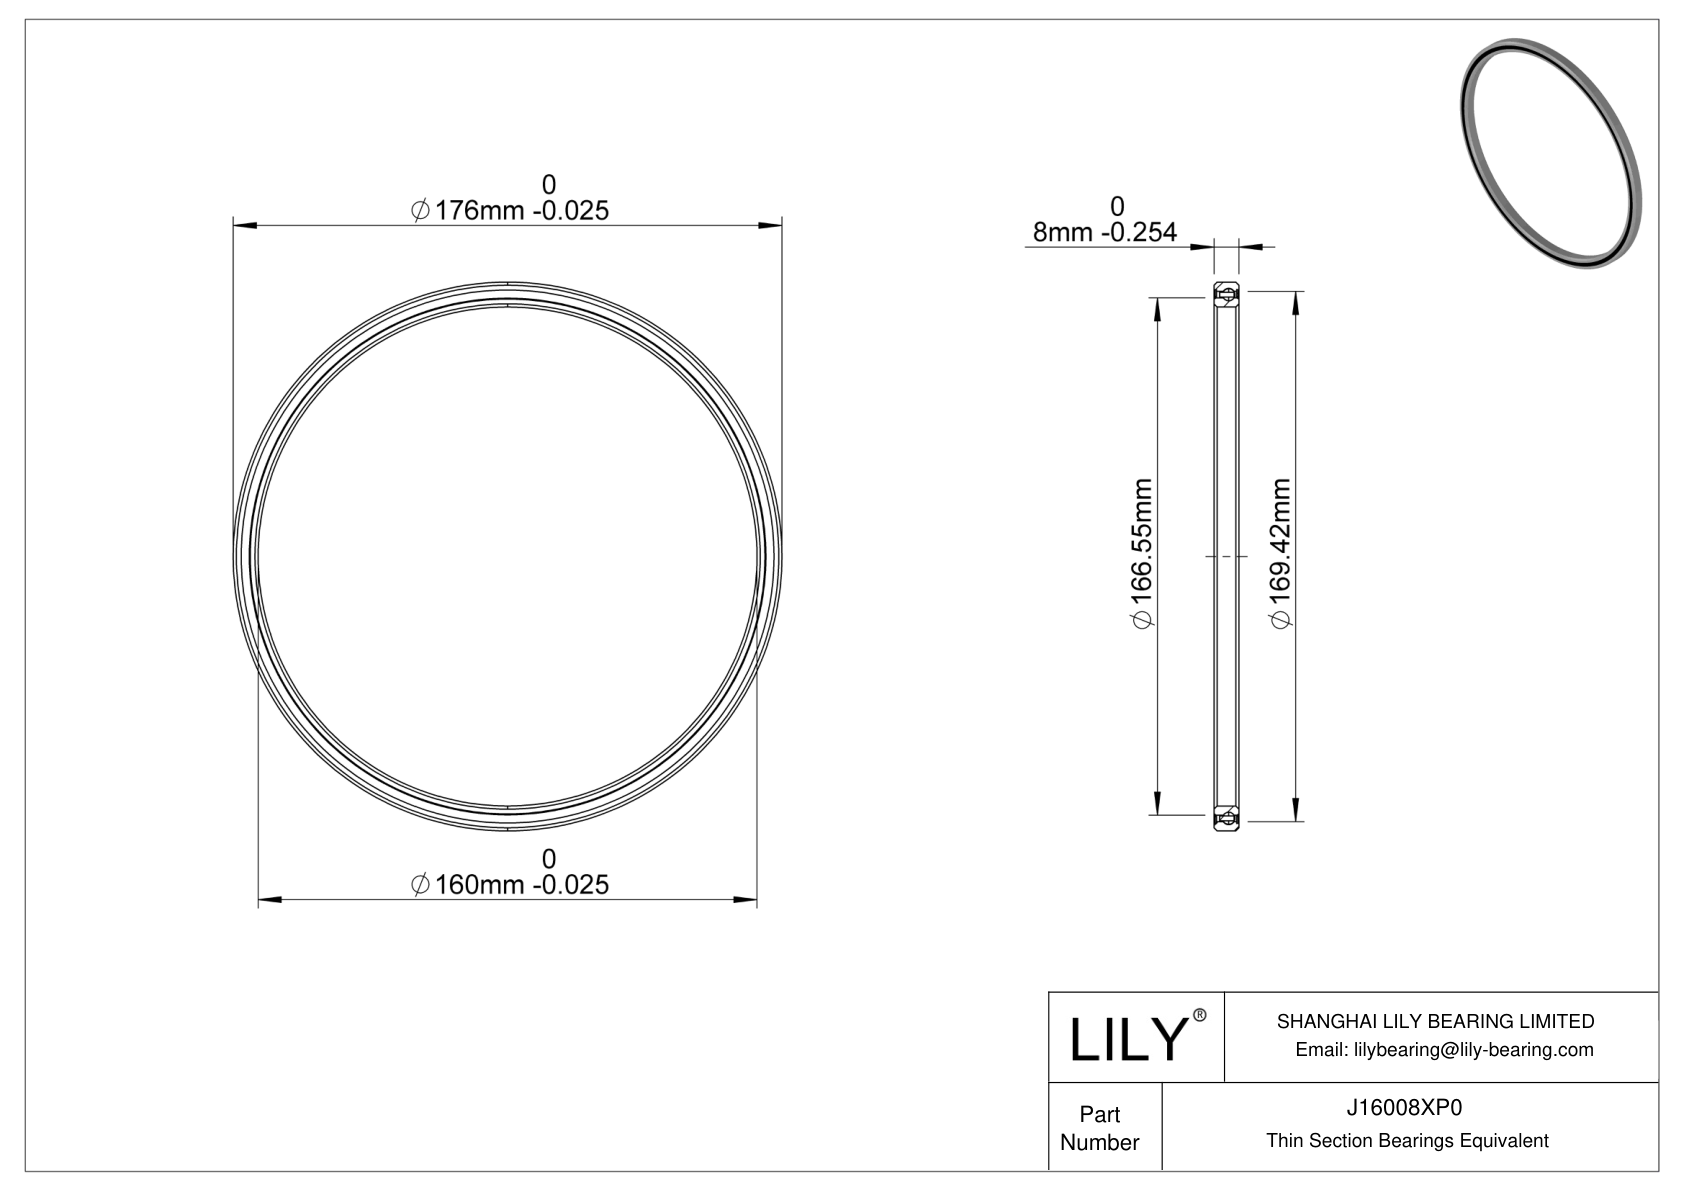 J16008XP0 Constant Section (CS) Bearings cad drawing